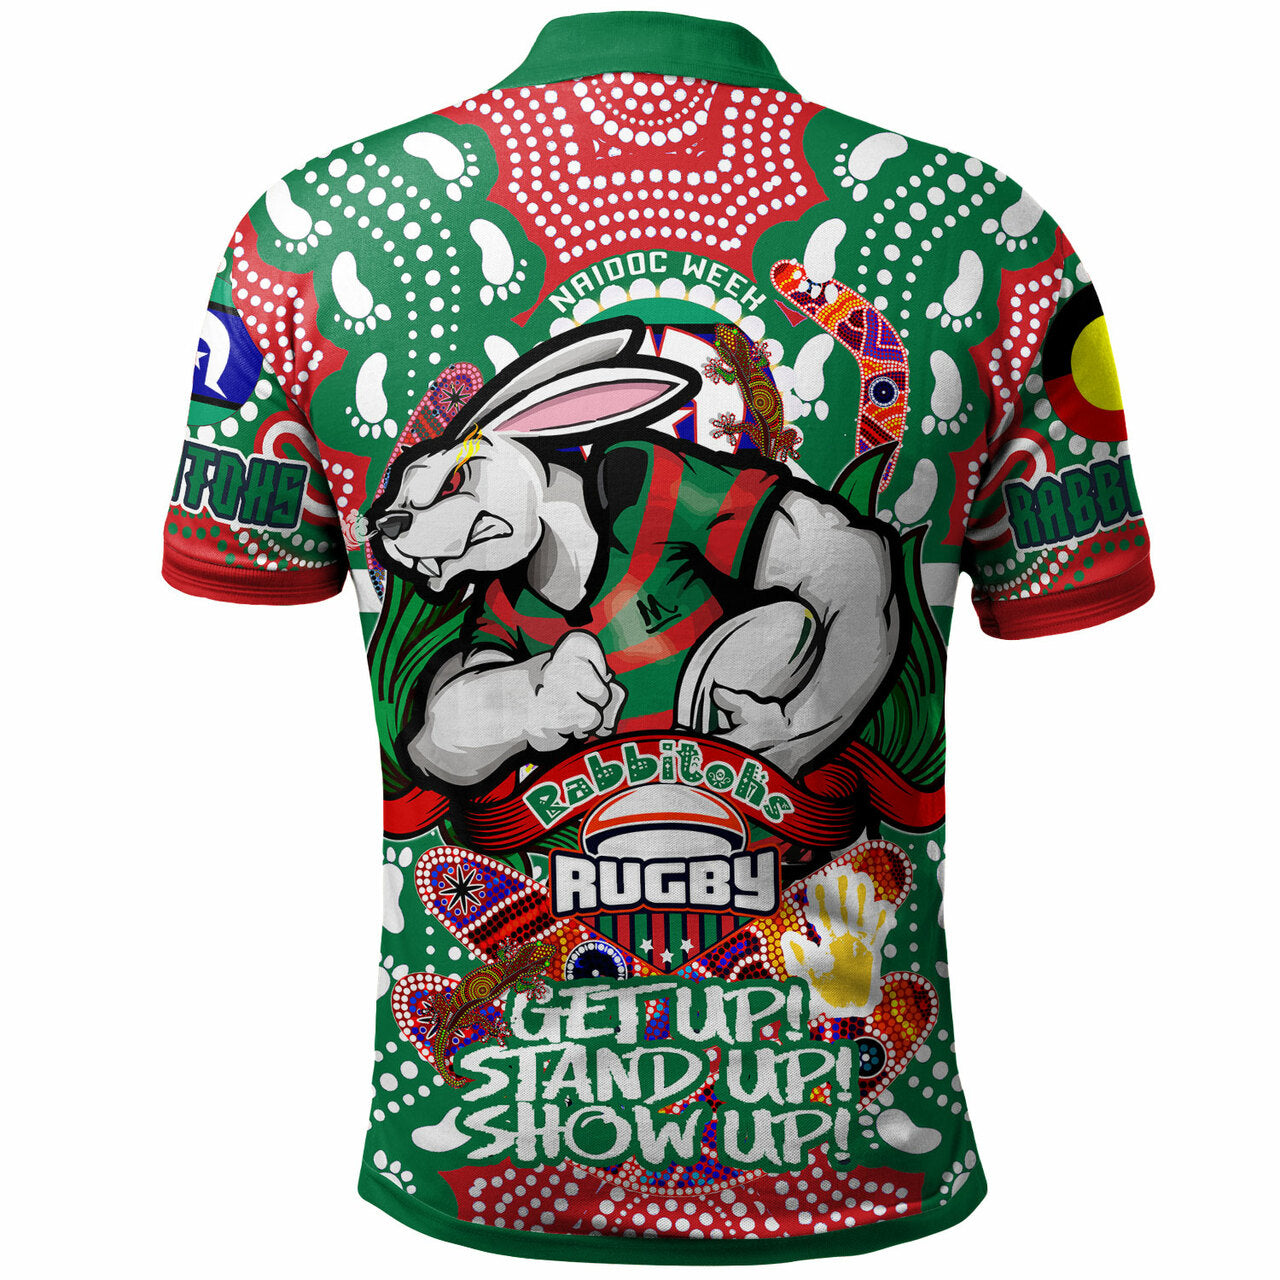 rabbitohs-rugby-naidoc-week-polo-shirt-south-sydney-rabbitohs-with-aboriginal-and-torres-strait-islander-culture-rlt12